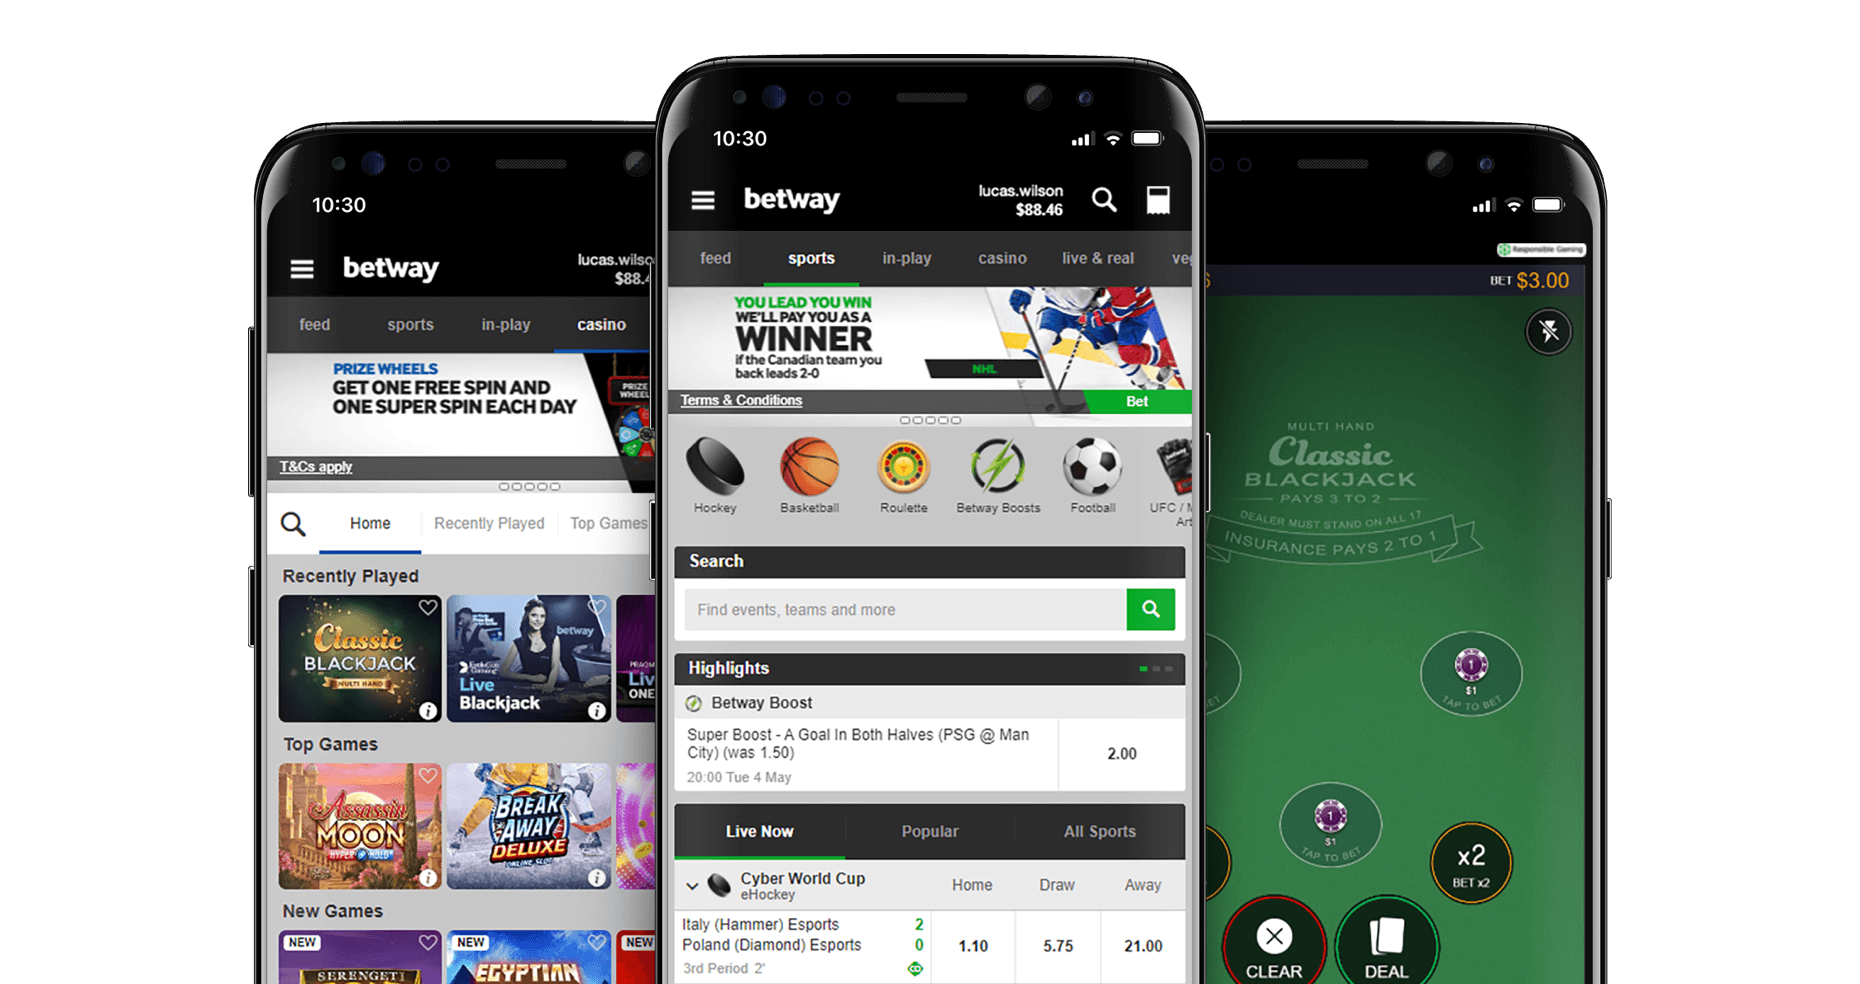 The Hrc Online Betting App Mystery Revealed